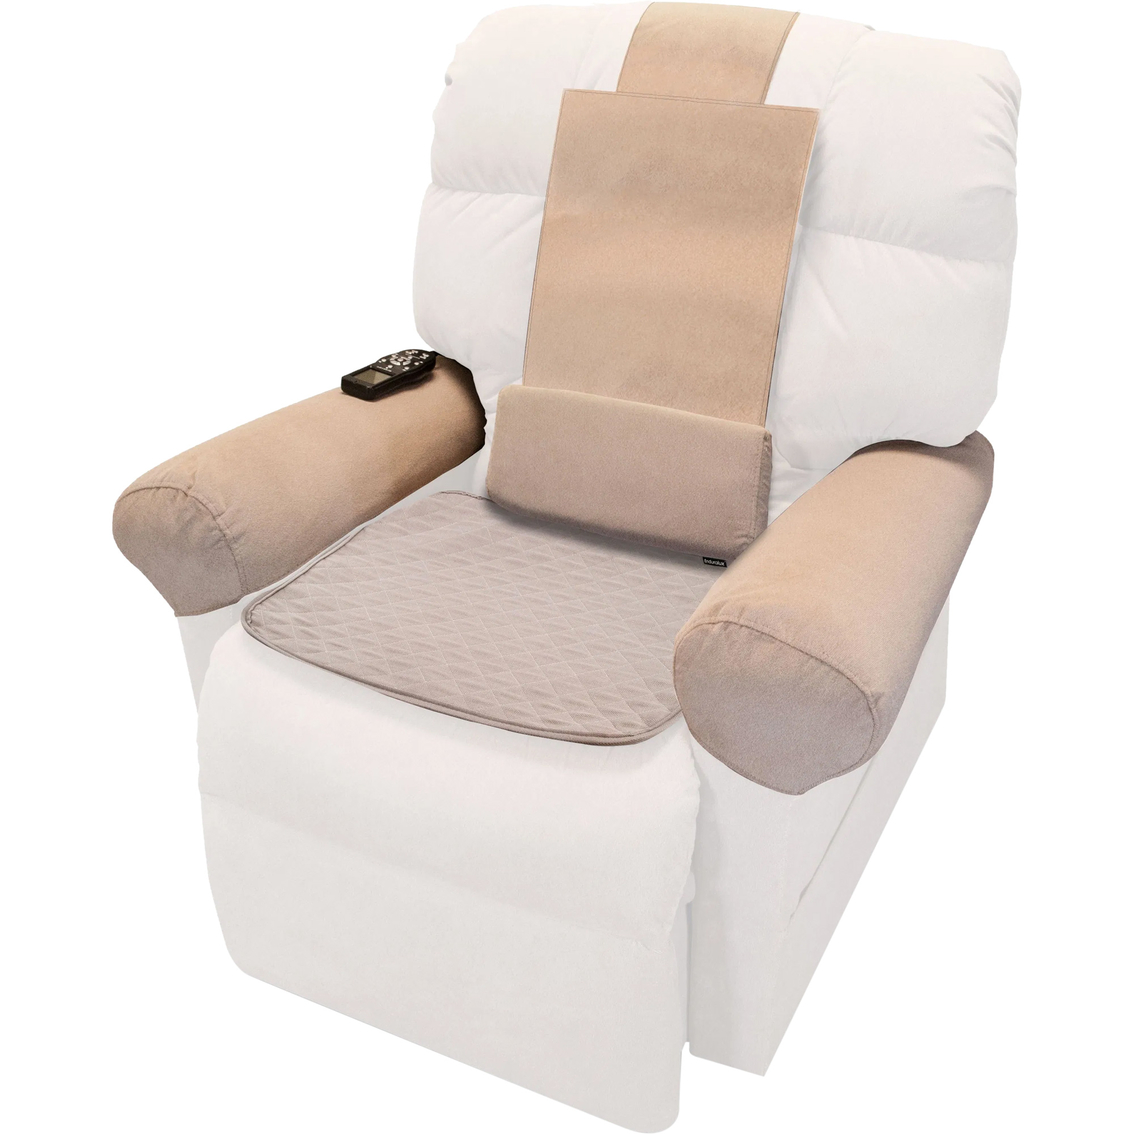 WiseLift WL450R Sleeper Recliner Chair - Image 6 of 8